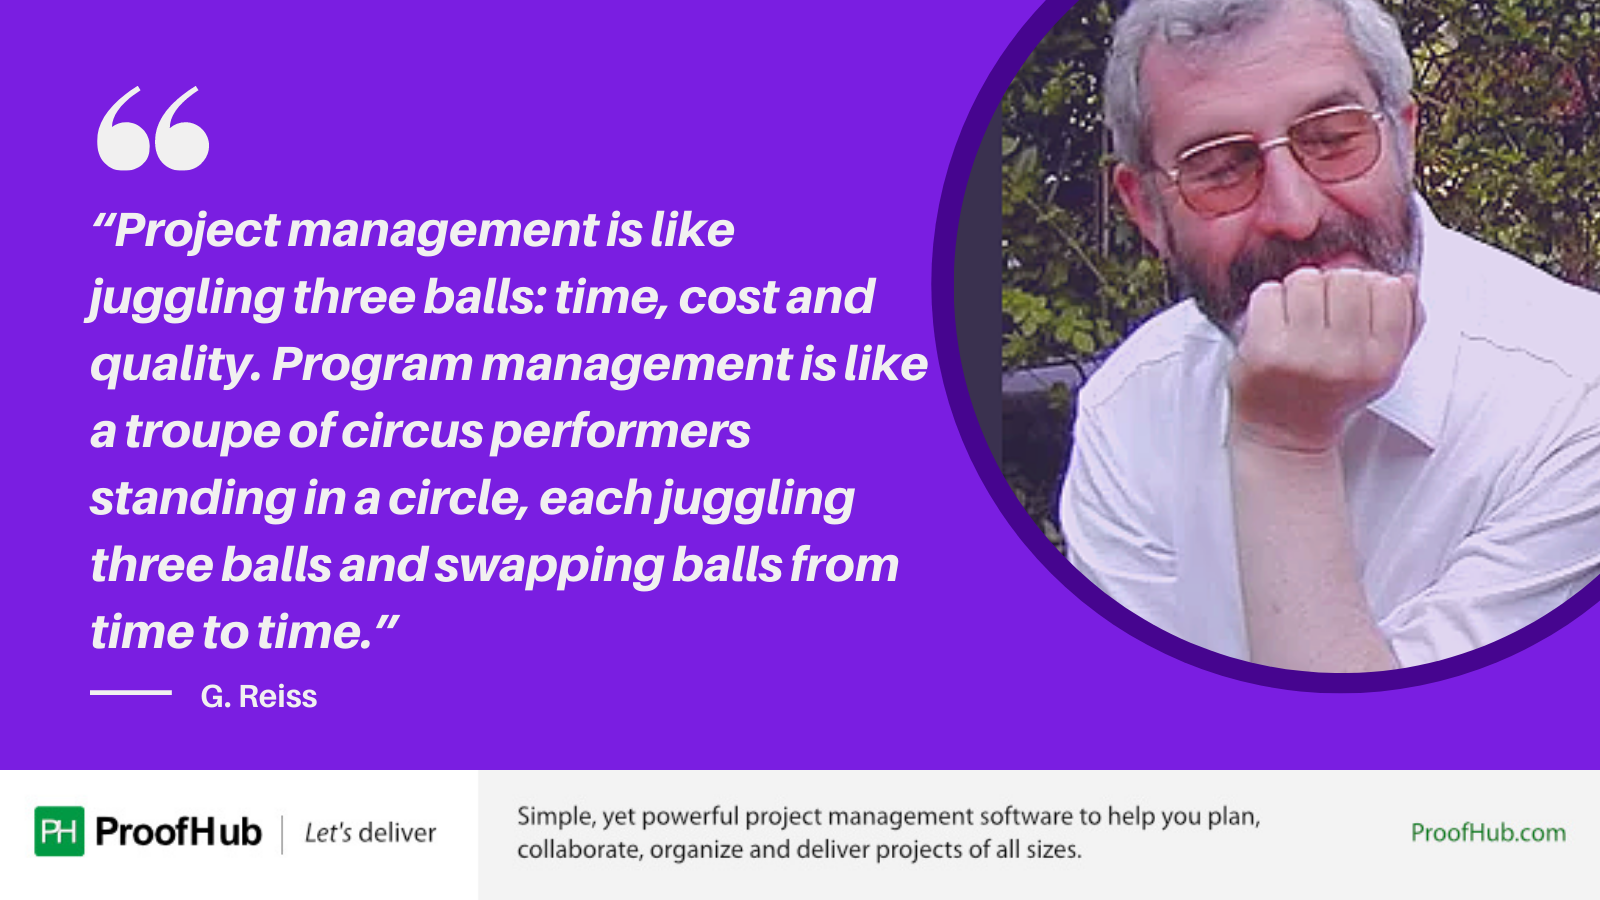 Project management is like juggling three balls: time, cost and quality. Program management is like a troupe of circus performers standing in a circle, each juggling three balls and swapping balls from time to time quote byG. Reiss